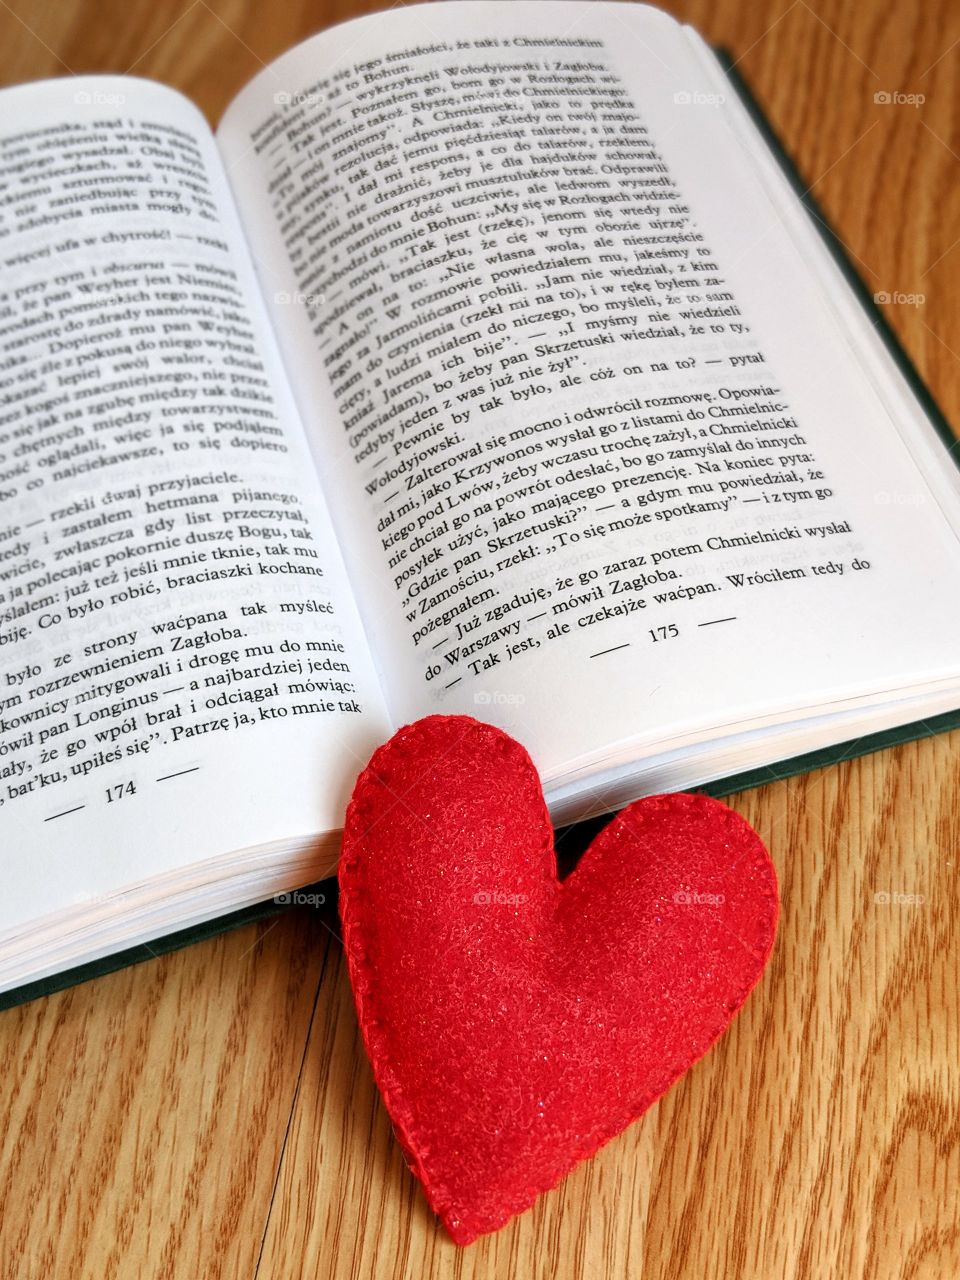 An open book and a red heart on a wooden background